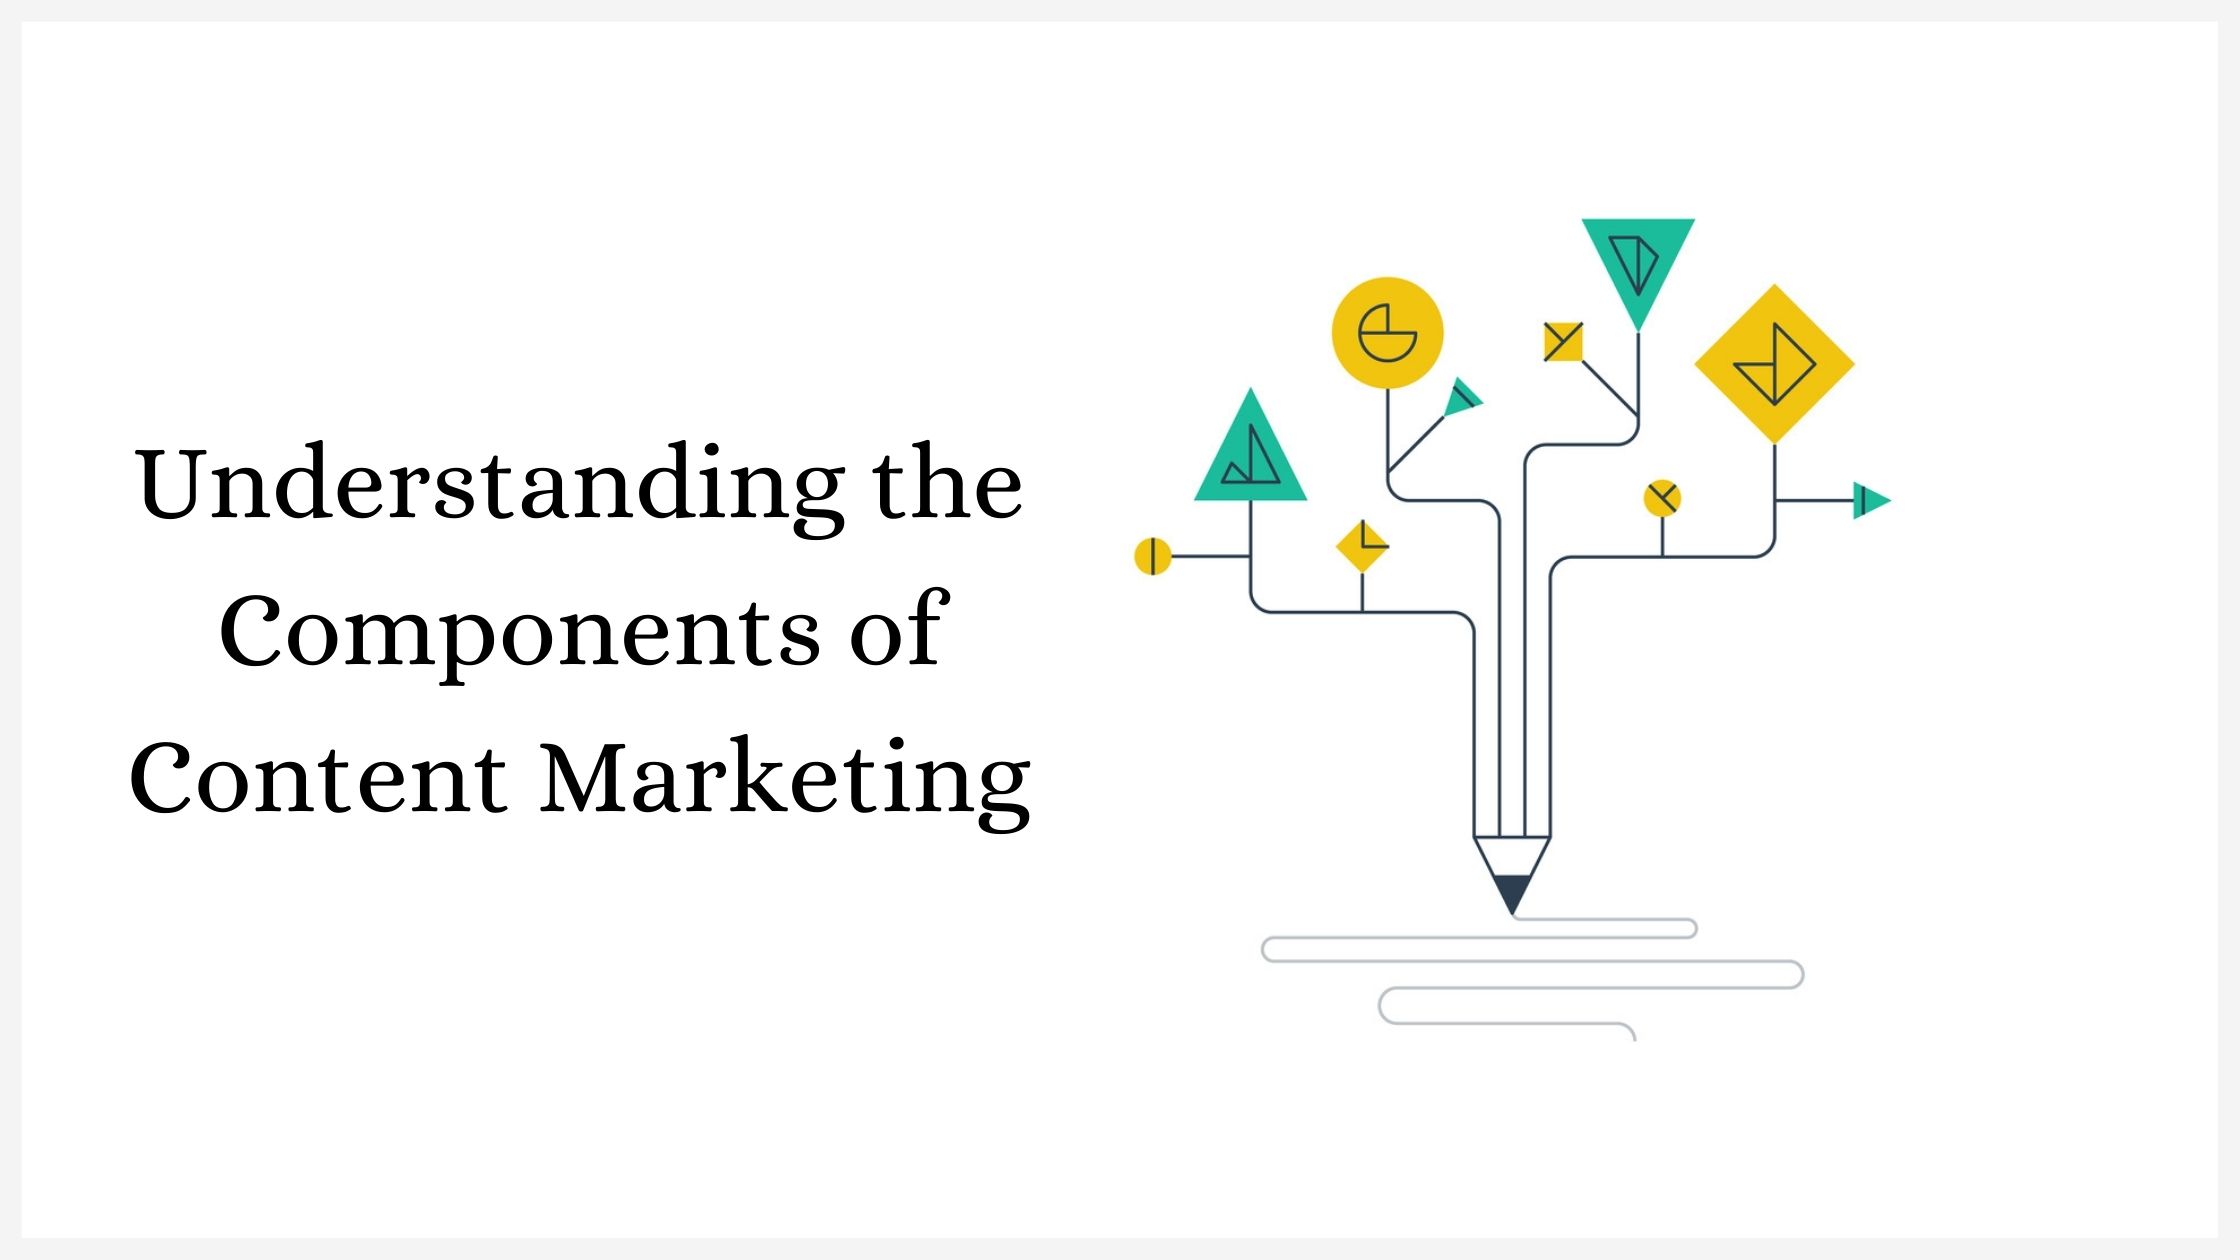 Components of Content Marketing